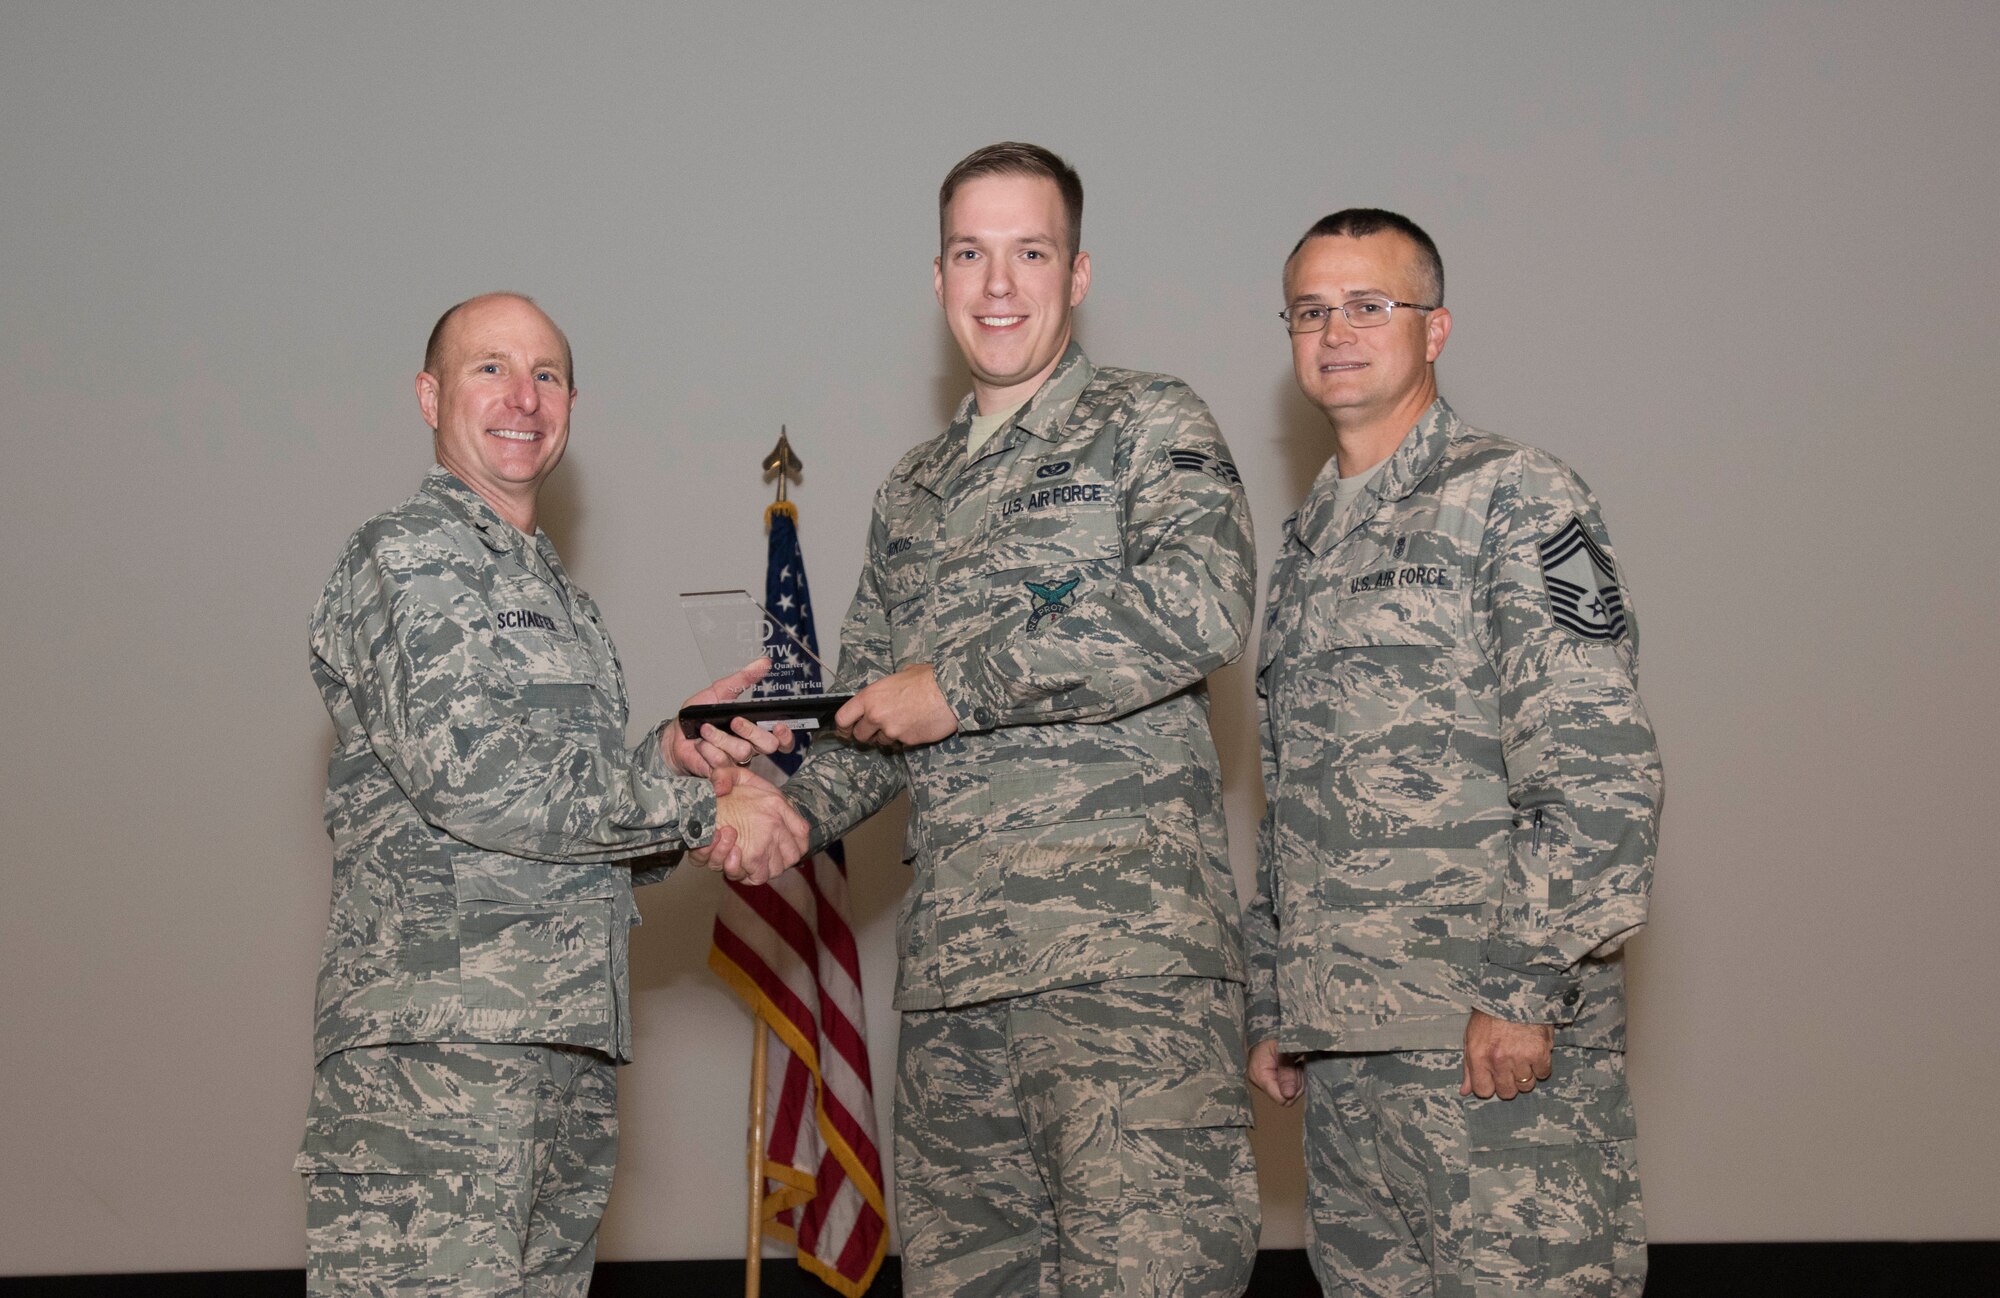 From left: Brig. Gen. Carl Schaefer, 412th Test Wing commander, presents Senior Airman Braedon Firkus, 812th Civil Engineer Squadron Fire Protection, with the 412th TW Airman of the Quarter award, along with Chief Master Sgt. Donald Cook, 412th Medical Group chief. The wing held its third quarter awards ceremony at the base theater Nov. 14. (U.S. Air Force photo by Brad White)